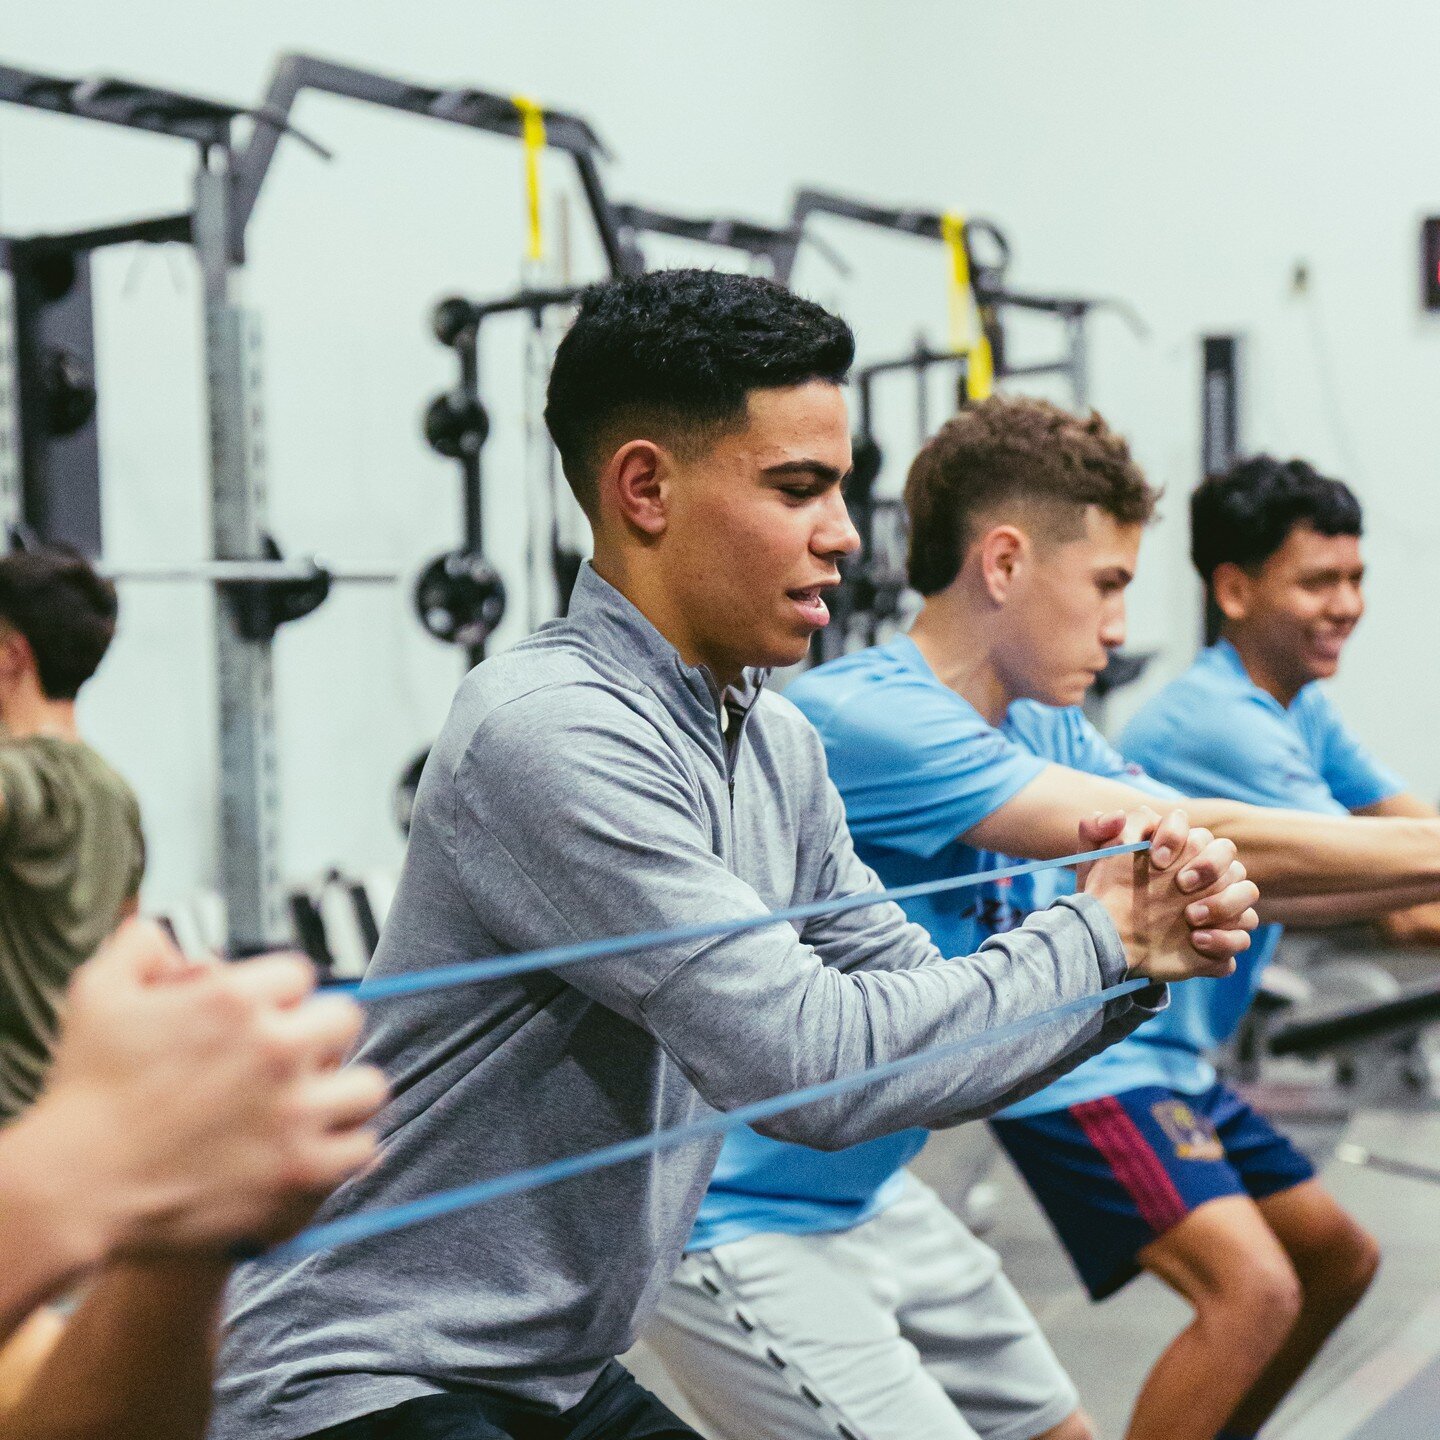 Elevate&rsquo;s Summer Youth Program is a perfect complement to sports-specific training. Summer is the perfect time to develop, improve and focus on skills that directly and indirectly affect competitive performance.

At Elevate, we prioritize safet